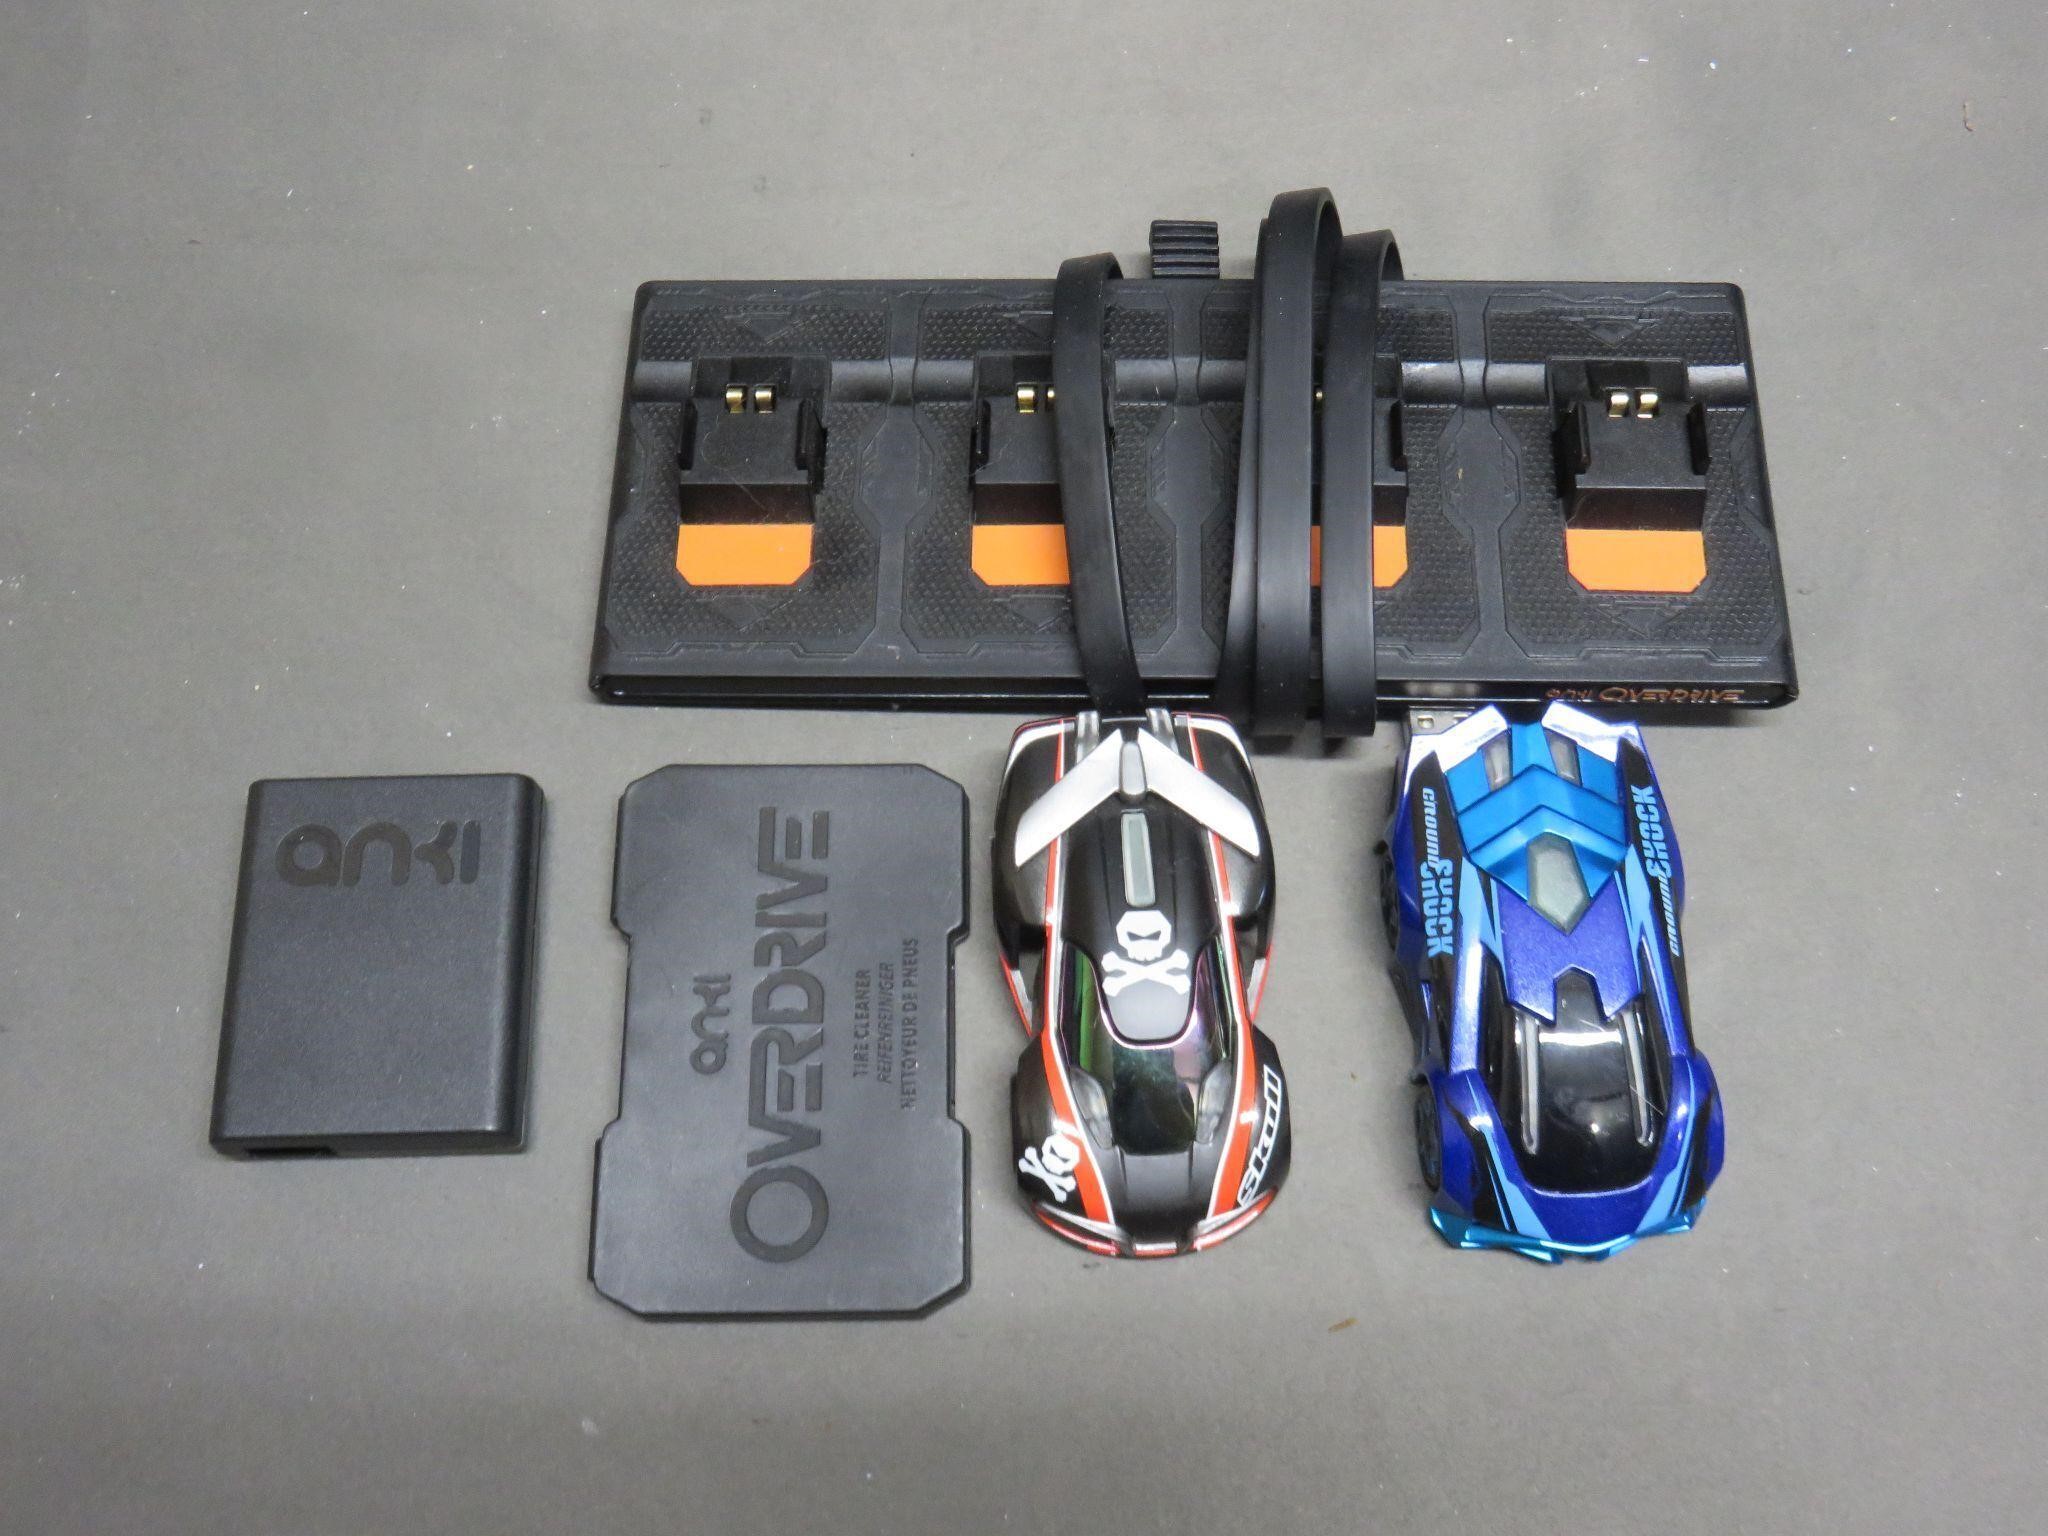 Anki Overdrive Cars Chargers Batteries